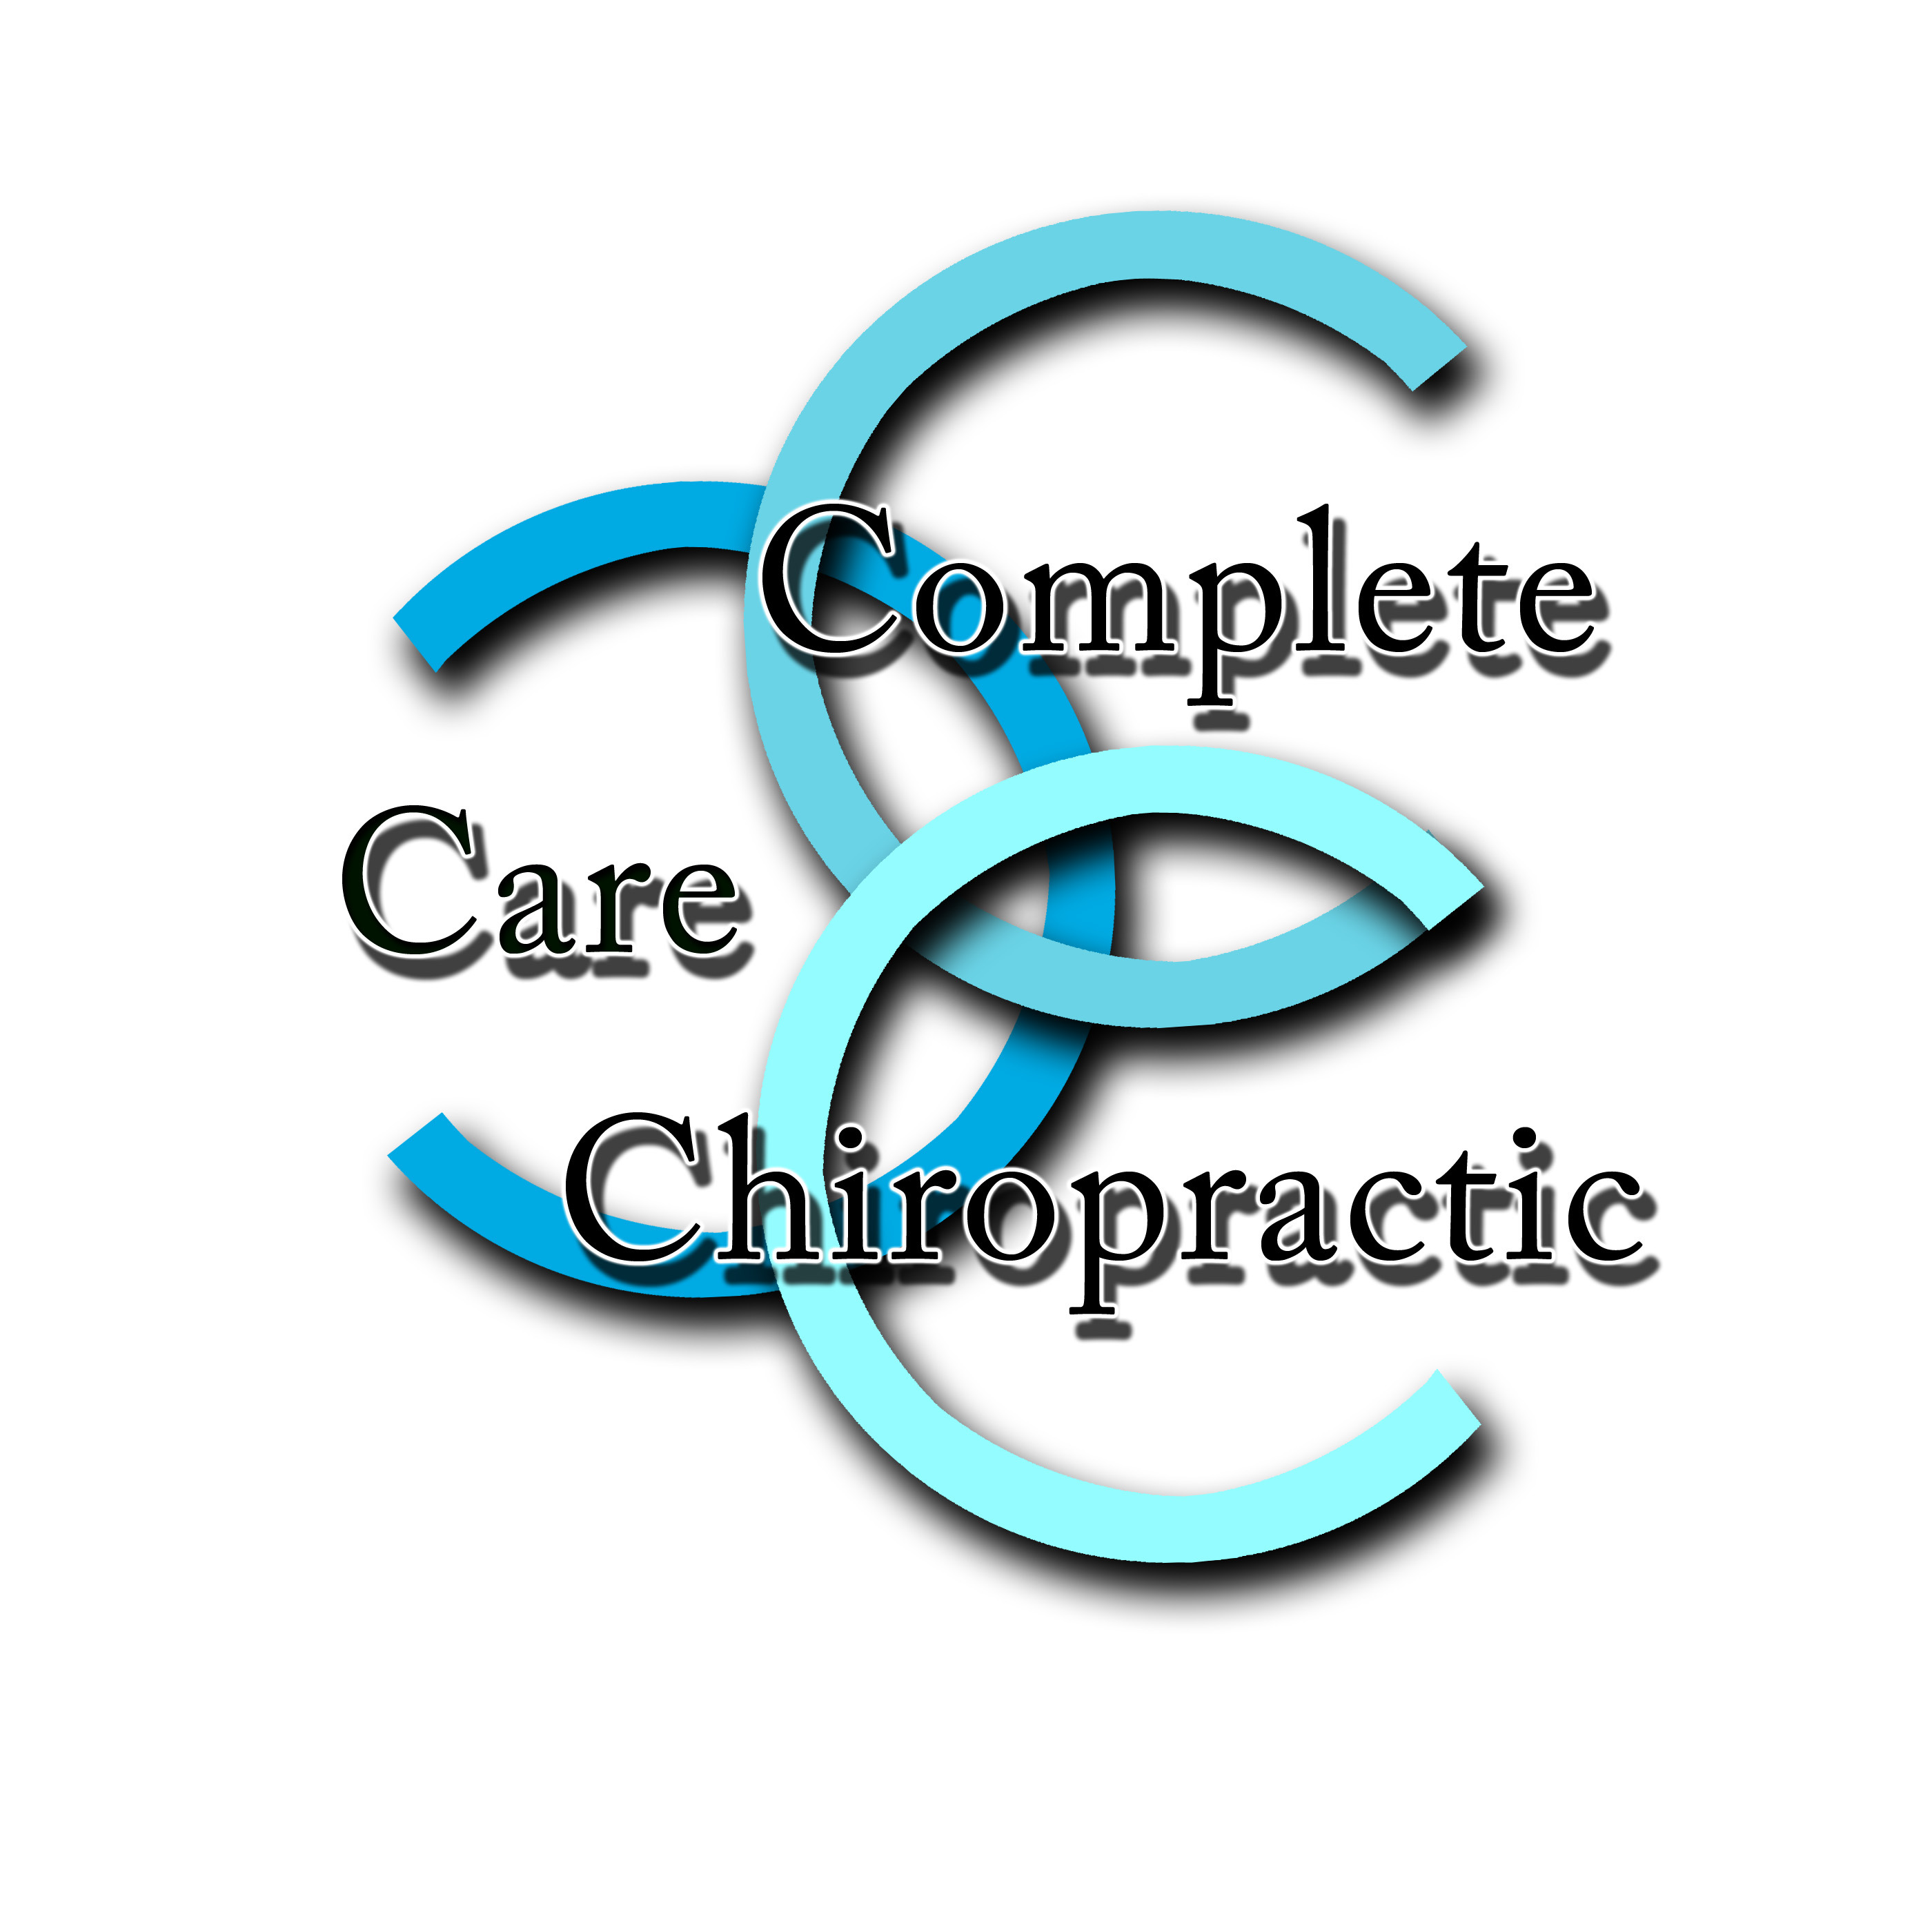 Complete Care Chiropractic - Williamsville, NY 14221 - (716)580-3577 | ShowMeLocal.com